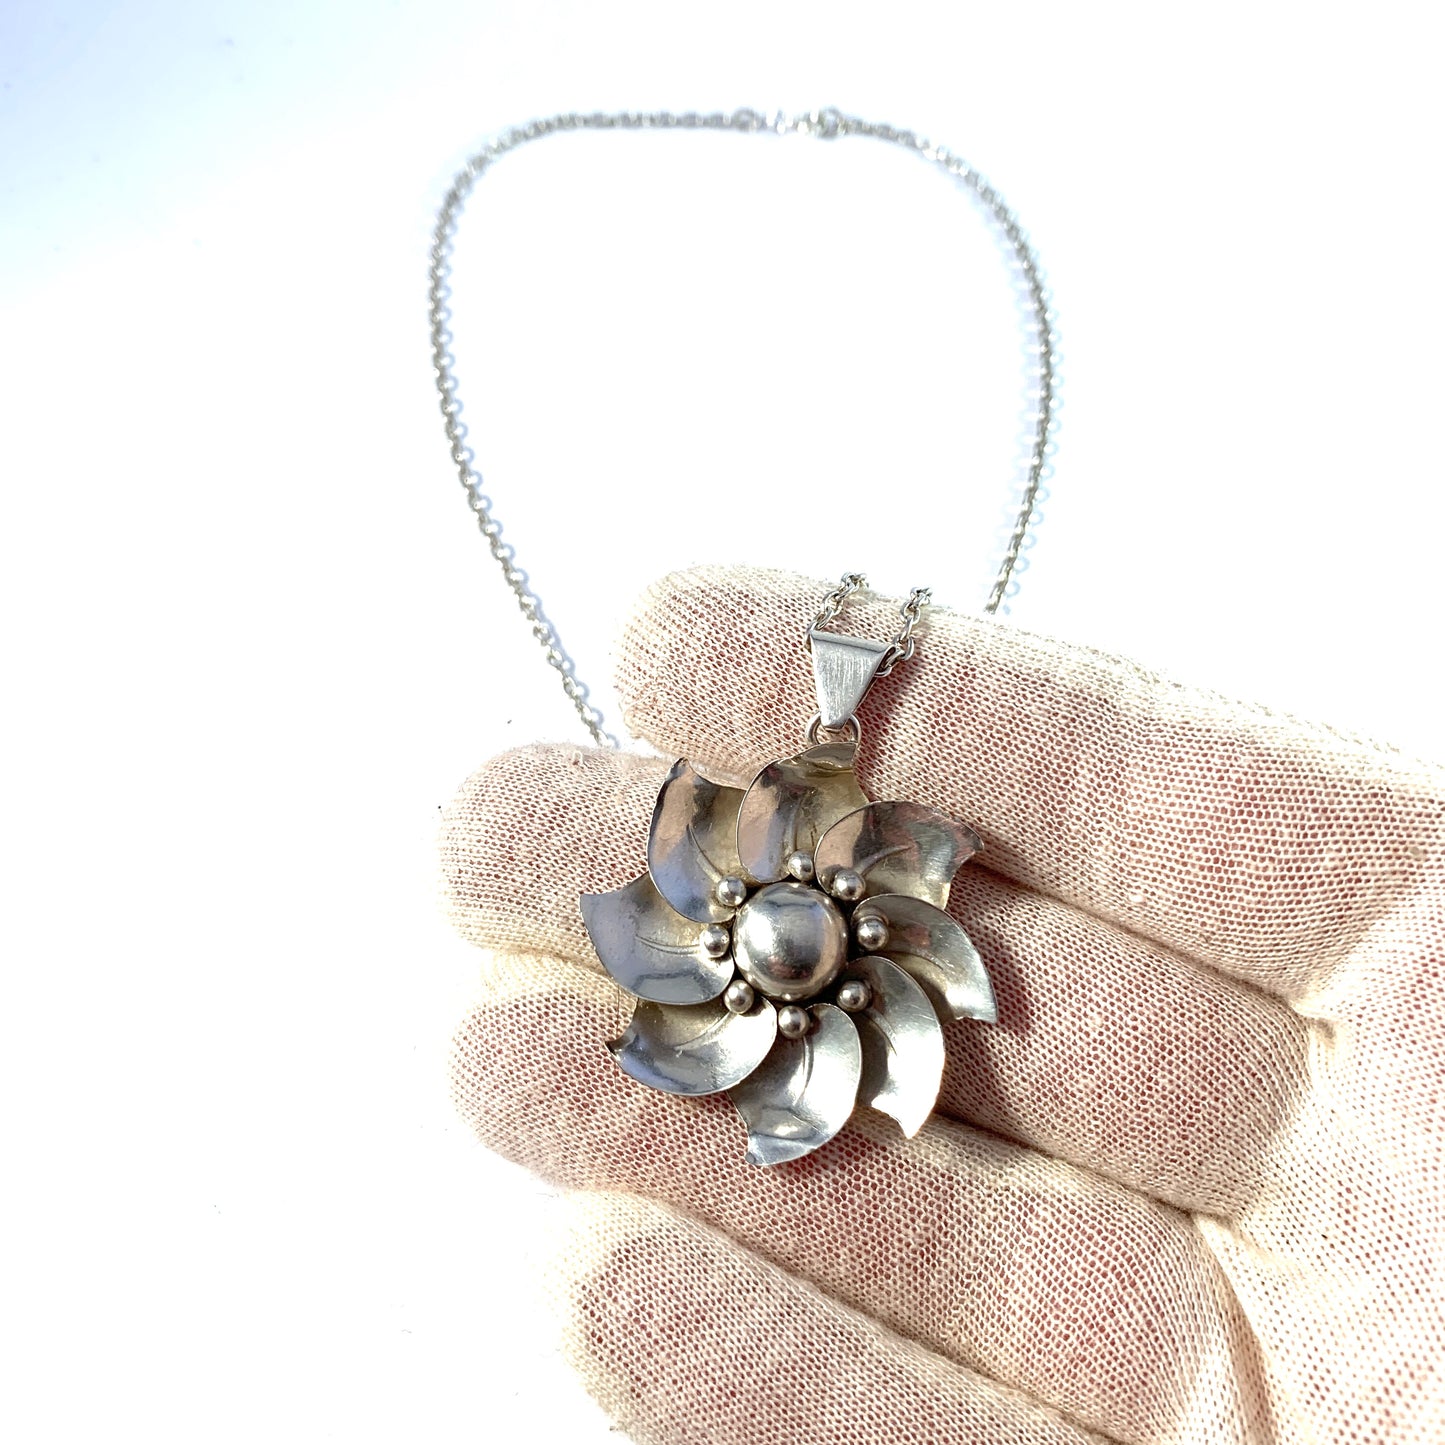 Mohlins, Sweden year 1948. Mid Century Sterling Silver Flower Pendant Necklace.